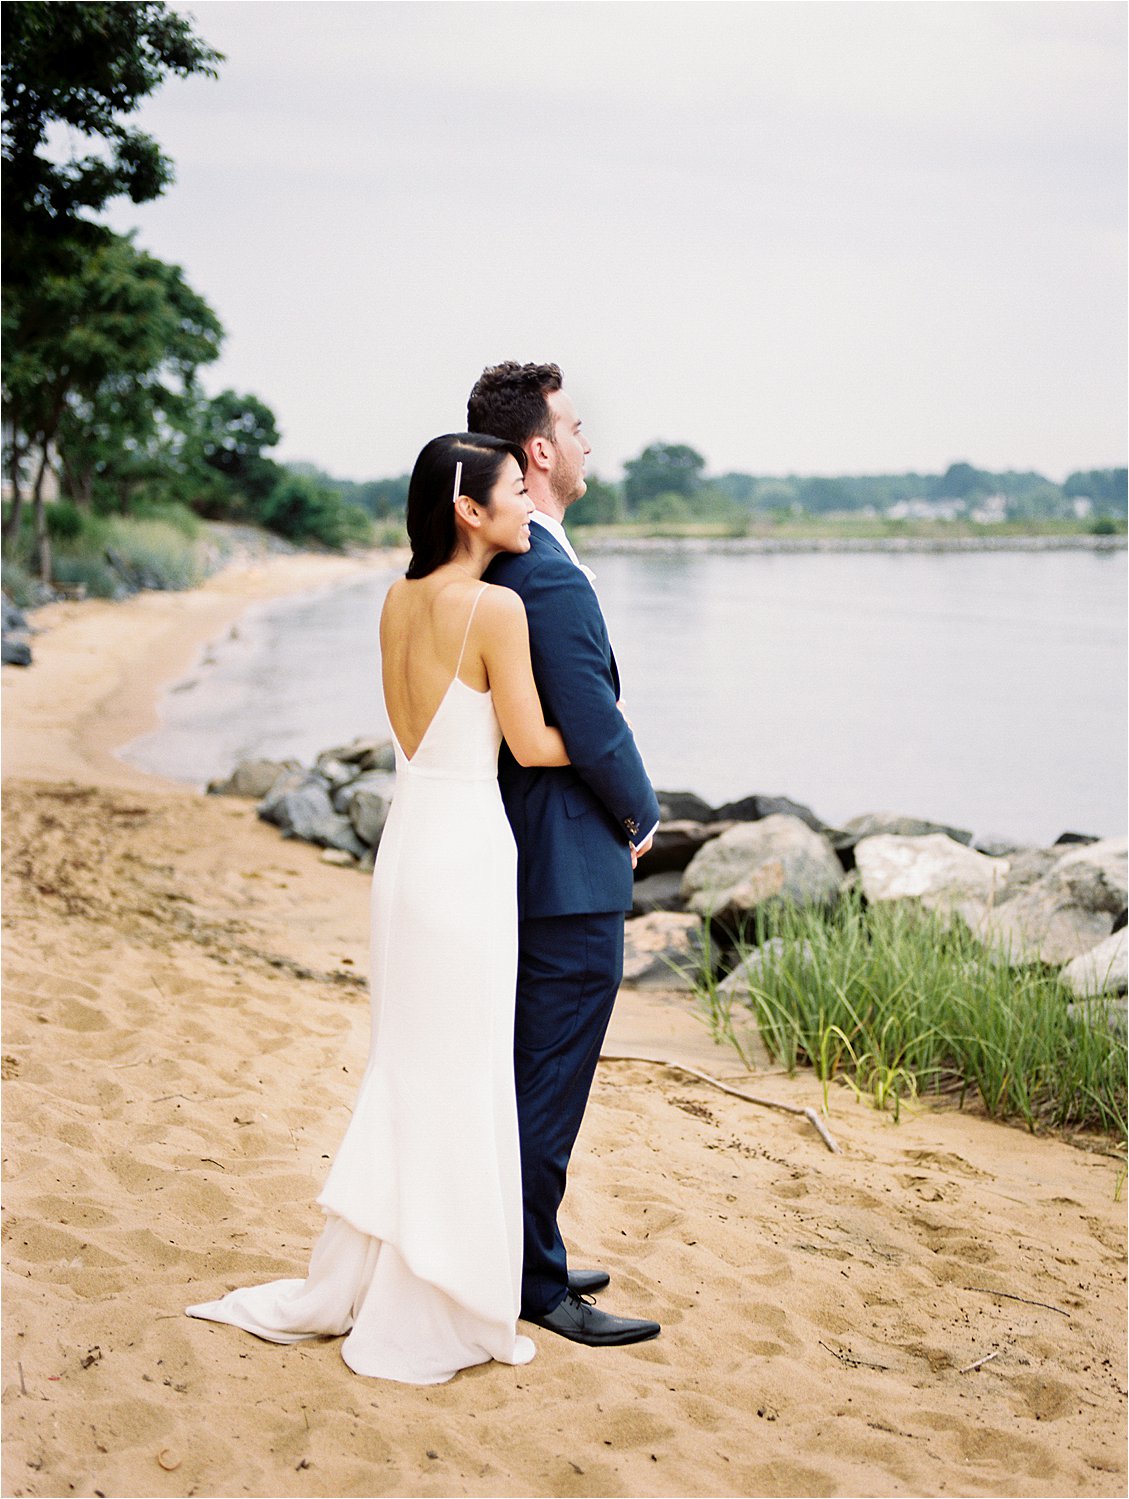 Bride & Groom Portraits at Modern Chesapeake Bay Beach Club Wedding: Cynthia + Liam by Maryland Film Wedding Photographer, Renee Hollingshead with Michael Design Florist, Kate Face Beauty, PSC Hair Artistry, Alexandra Grecco, Lovely Bride NYC, and more